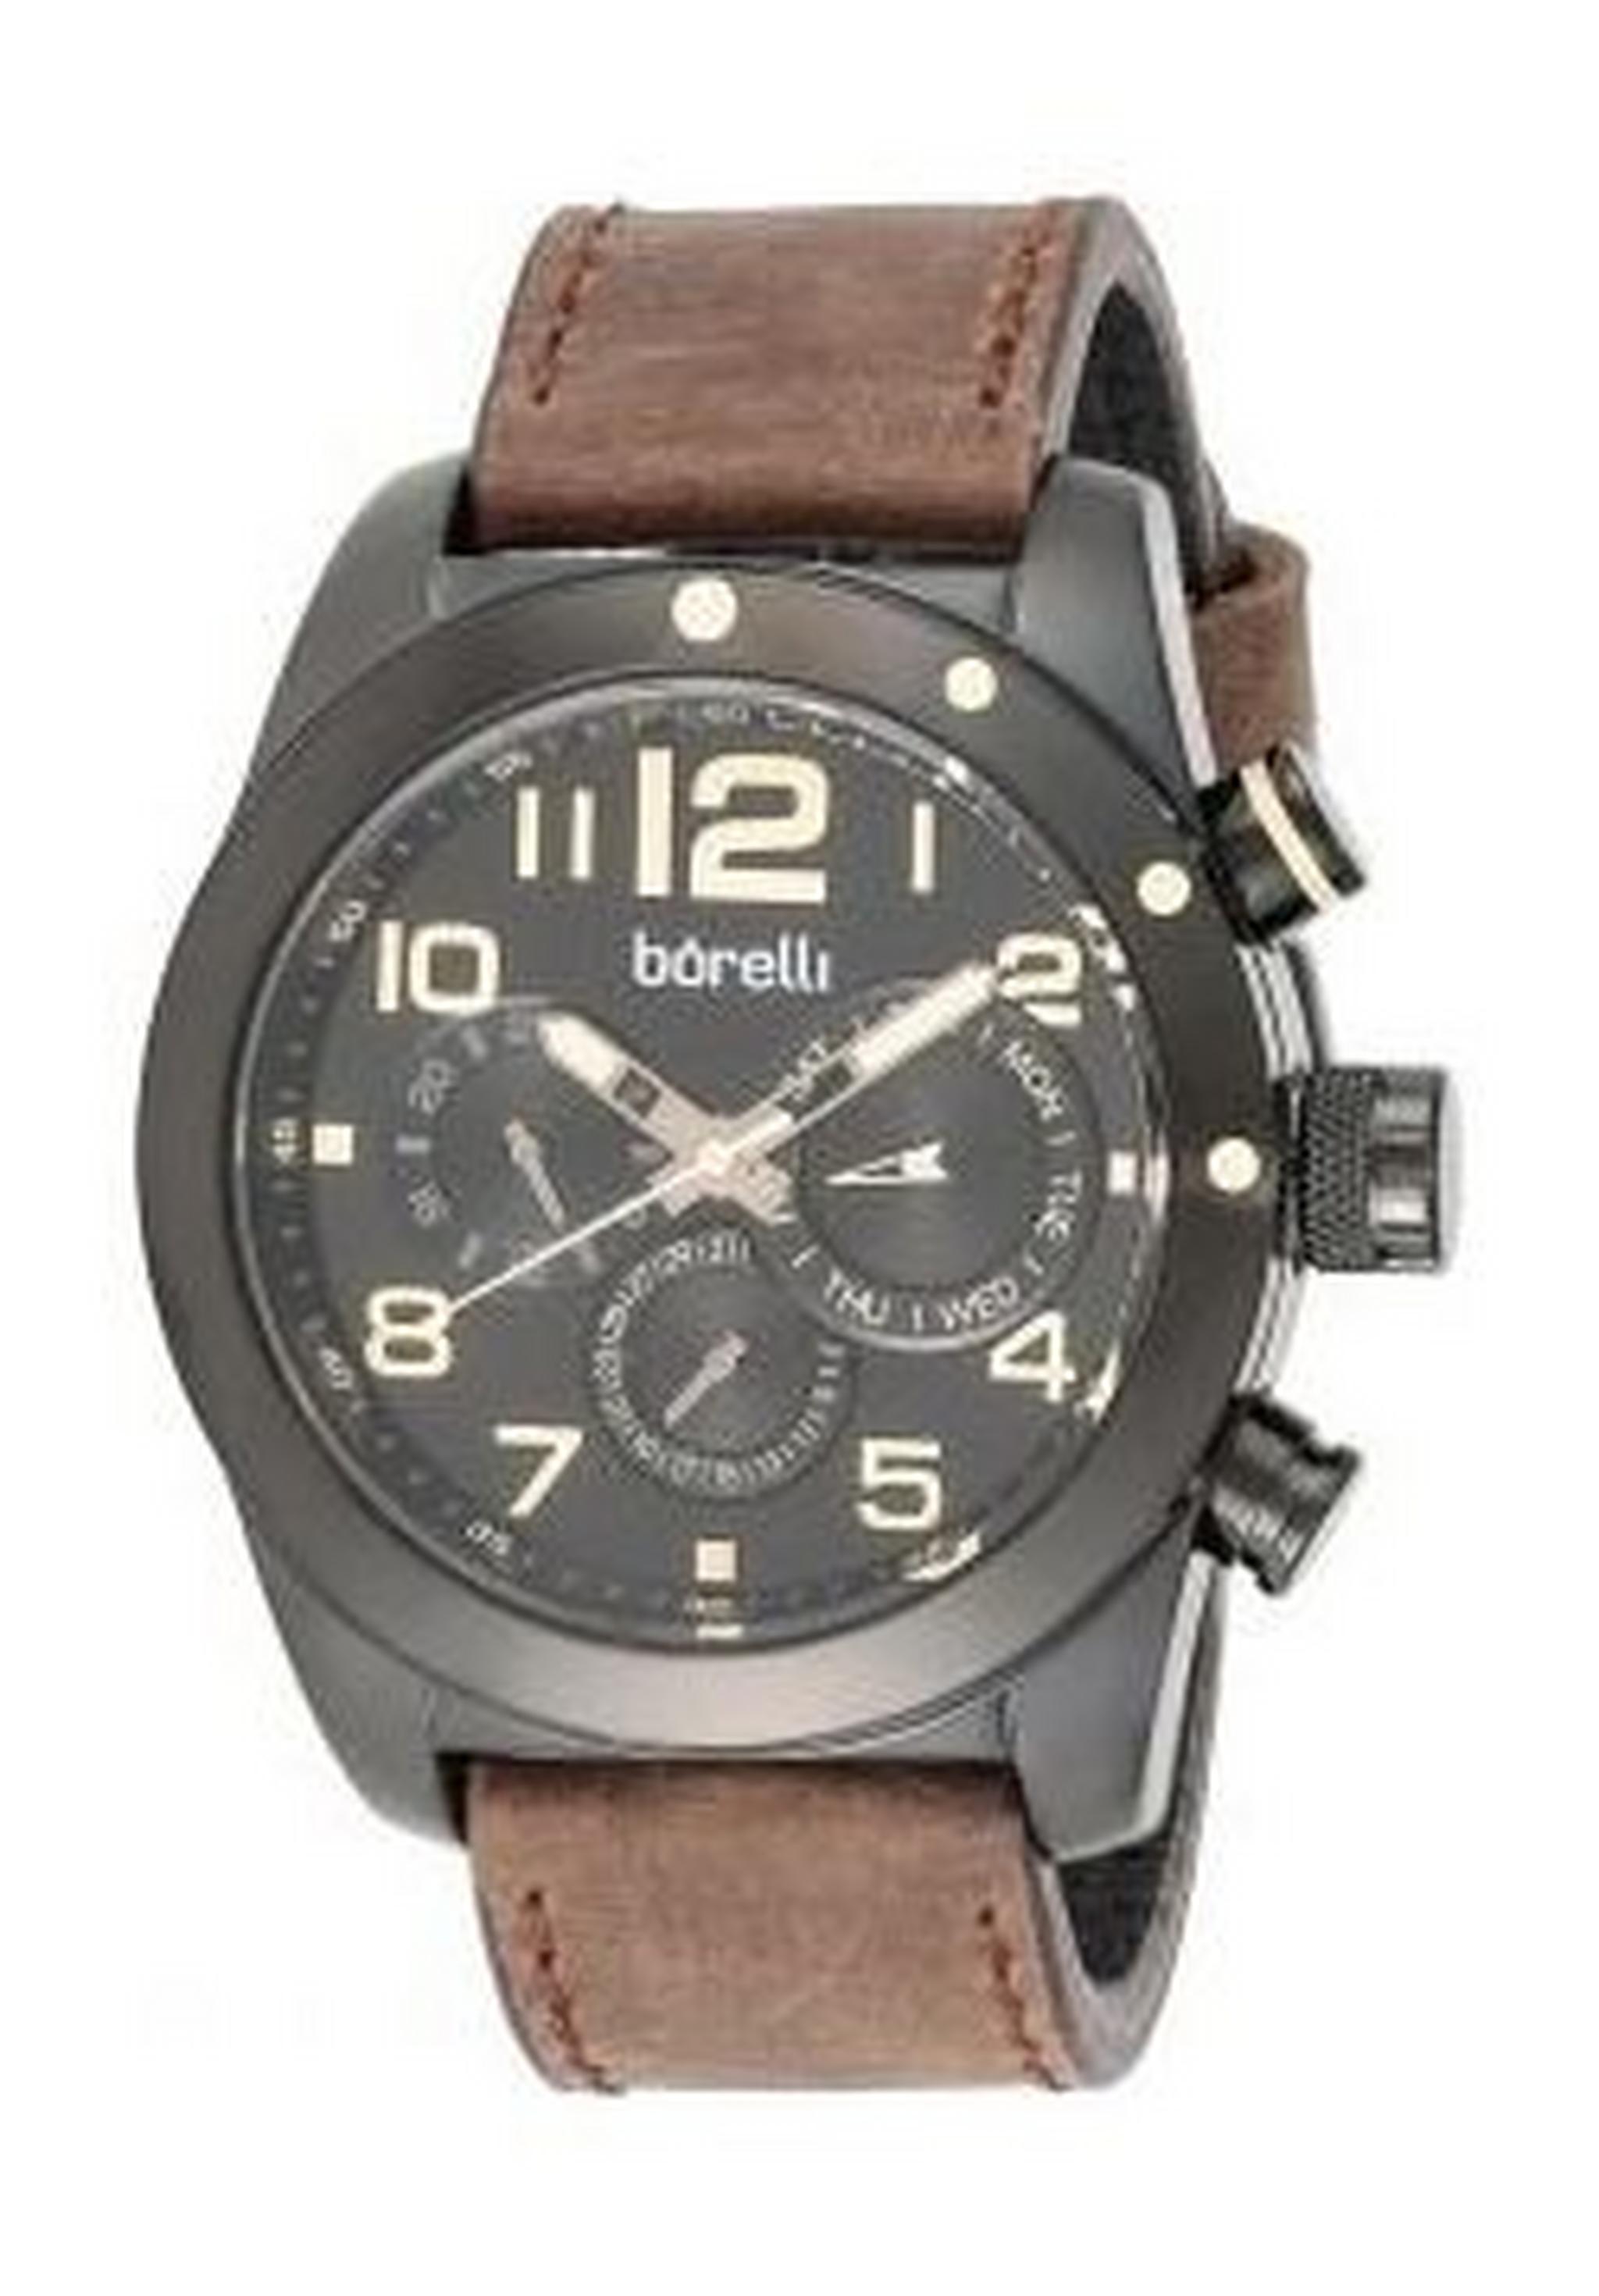 Borelli BMS12500016 Gents Chronograph Watch - Leather Strap – Brown